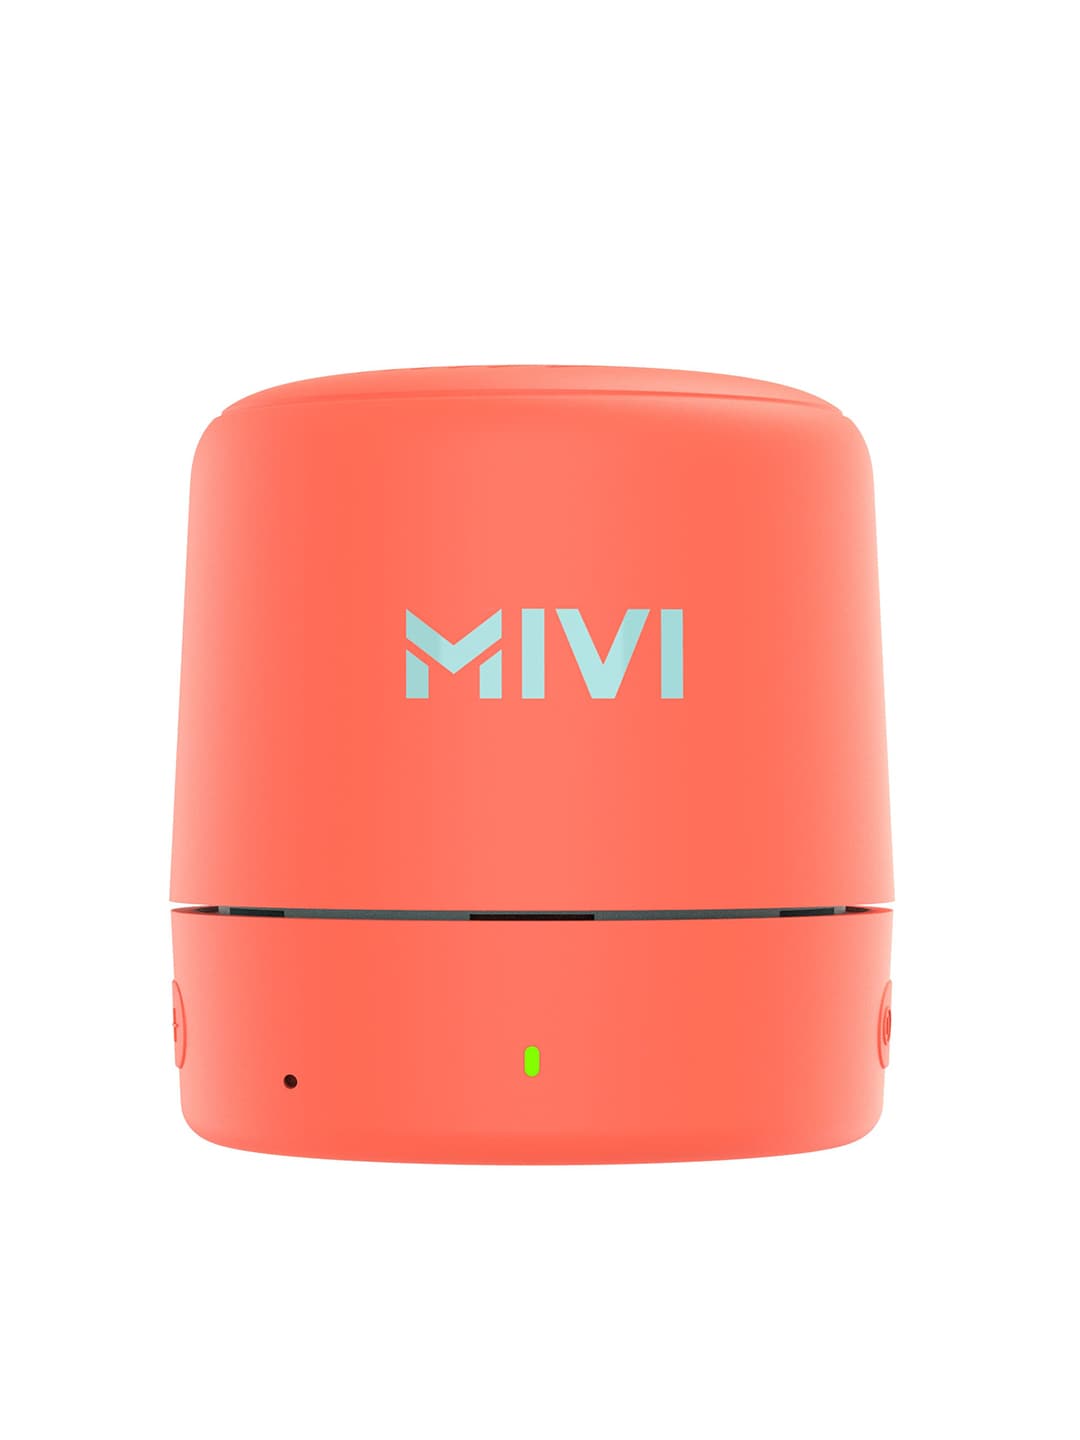 mivi Orange Play Bluetooth Speaker with 12 Hours Playtime Price in India